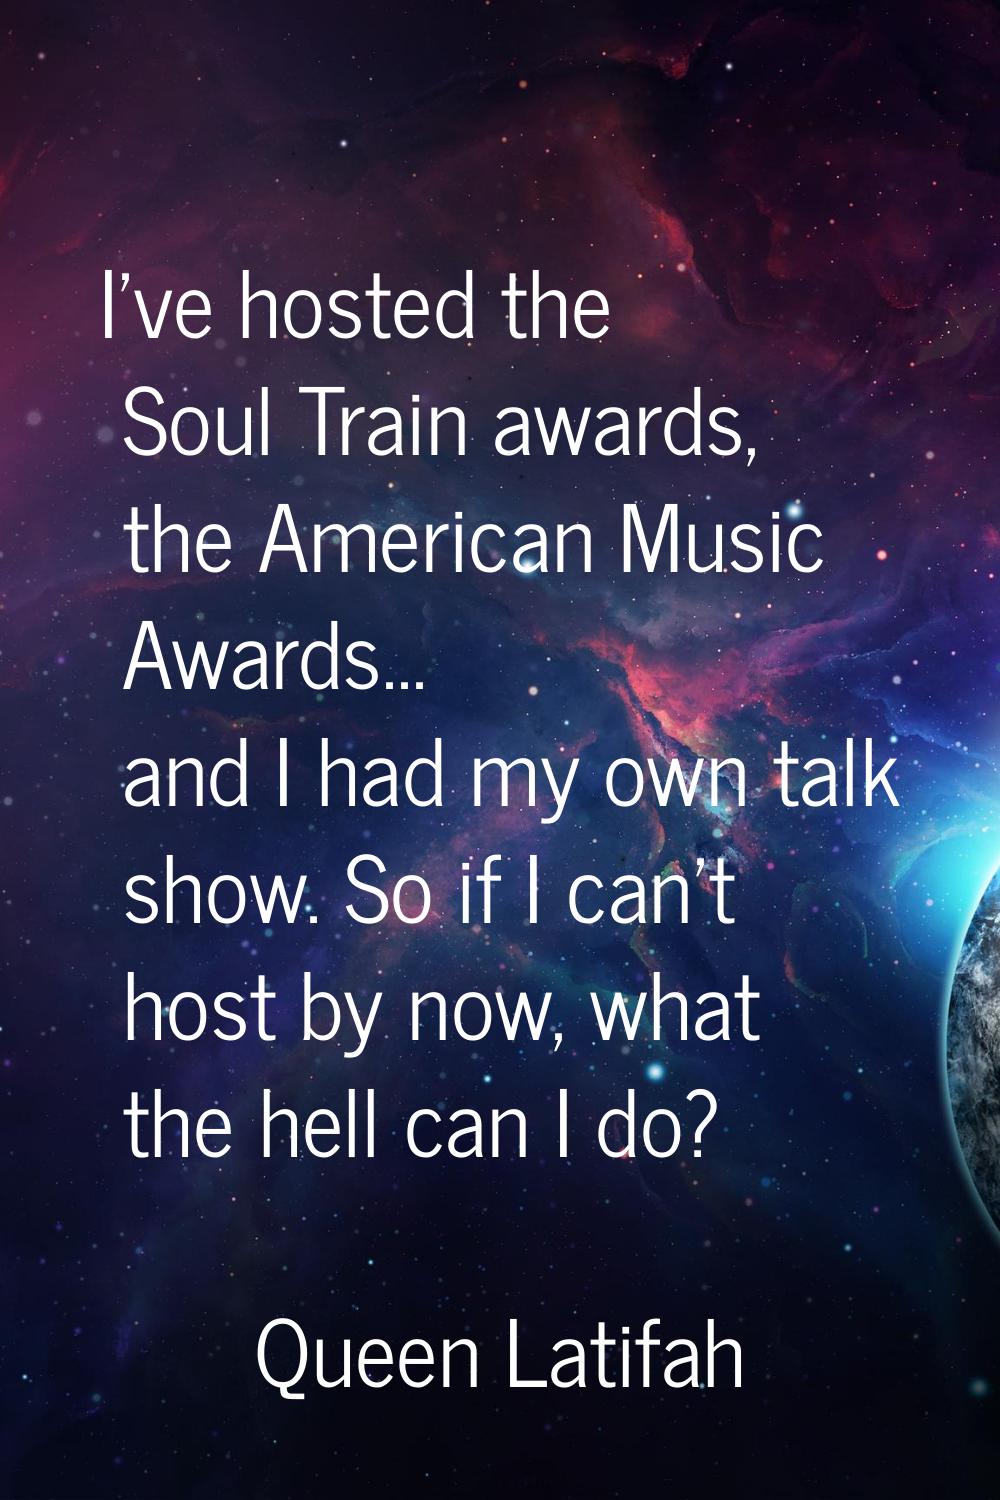 I've hosted the Soul Train awards, the American Music Awards... and I had my own talk show. So if I